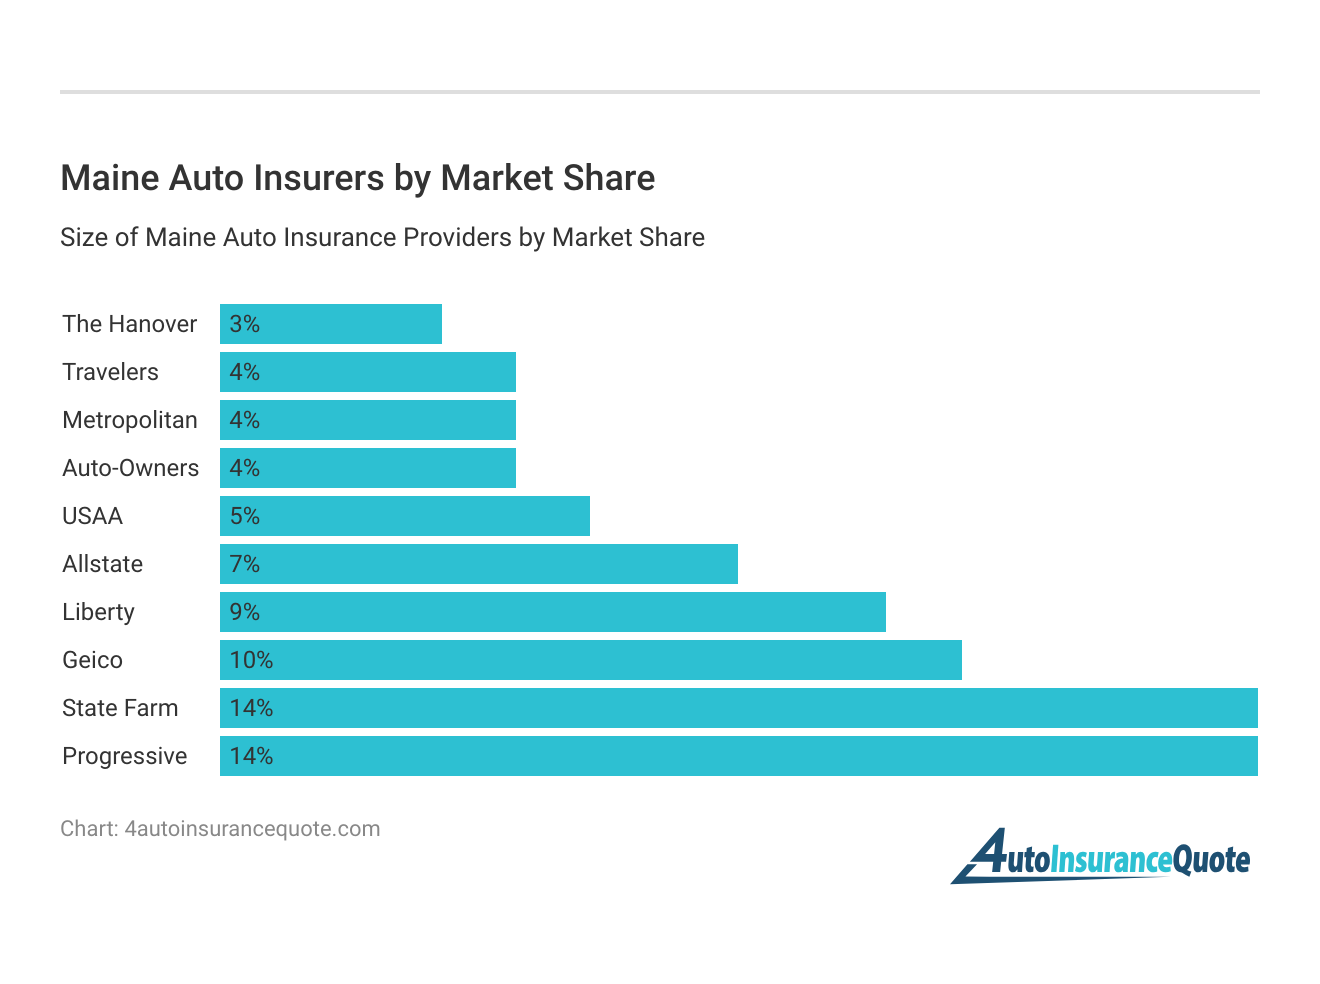 <h3>Maine Auto Insurers by Market Share</h3>